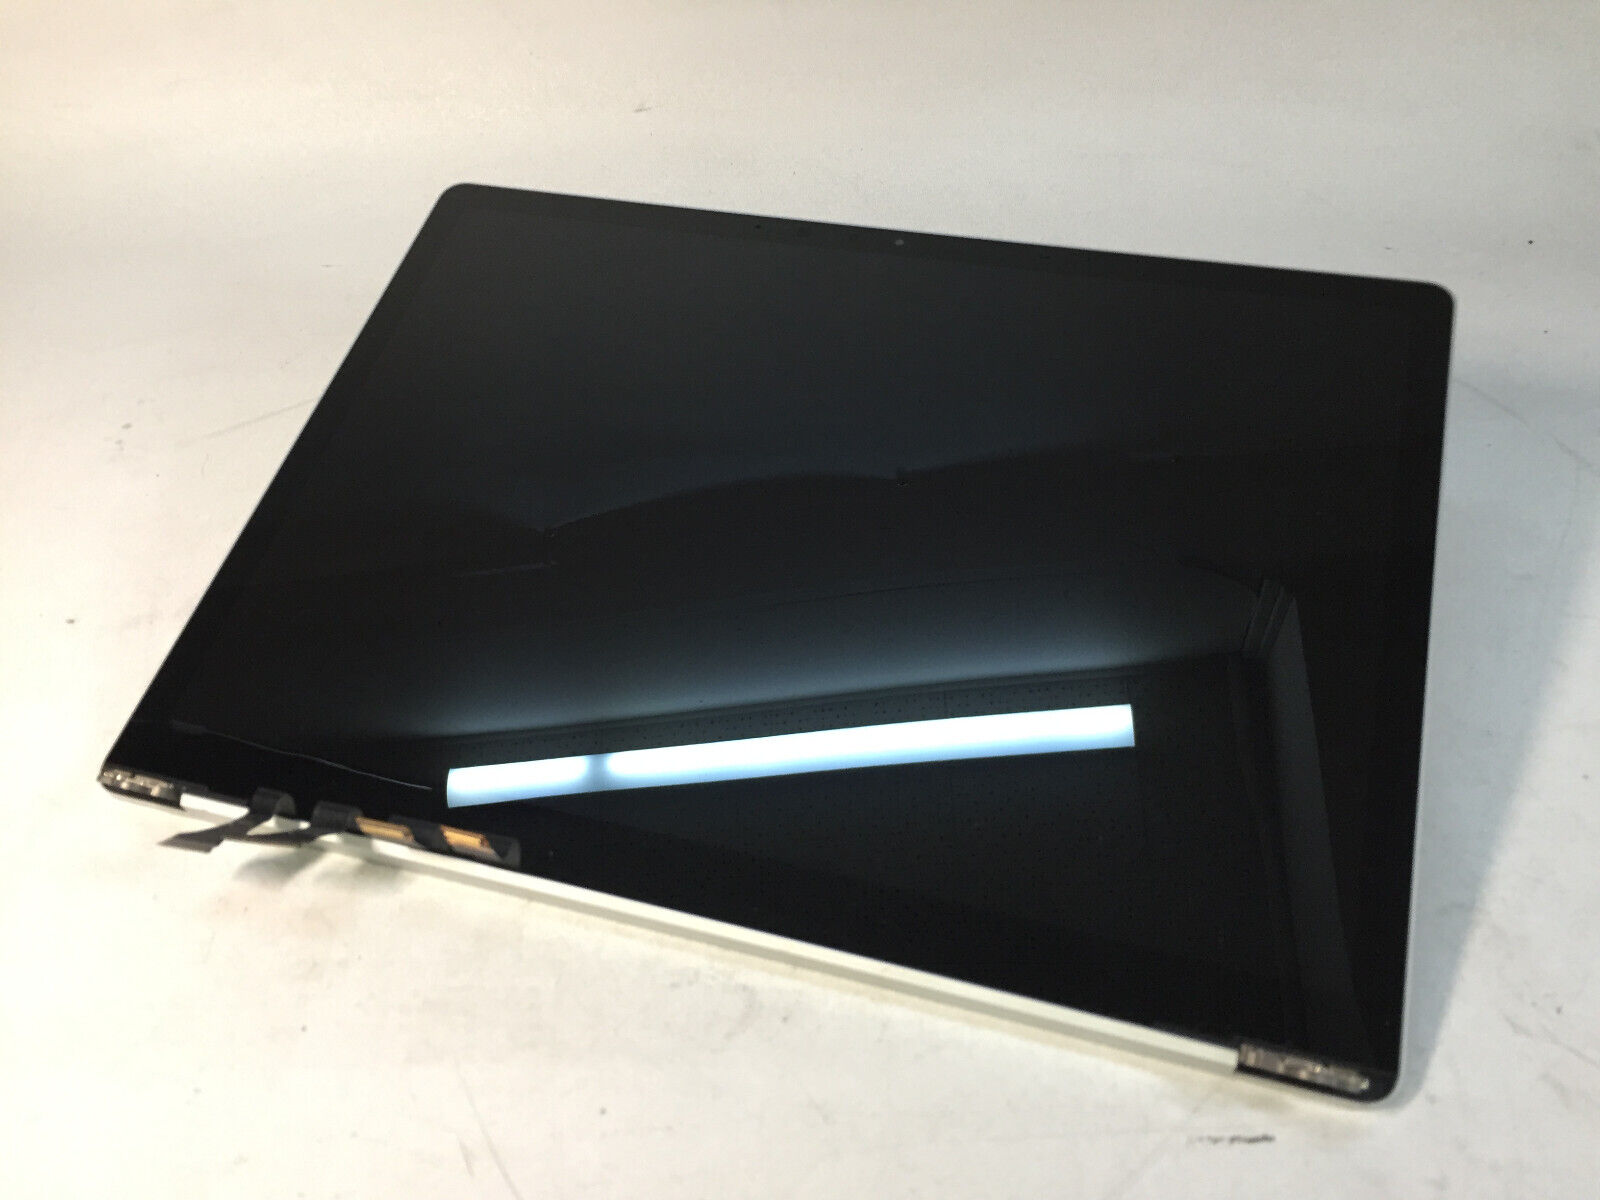 Microsoft Surface Replacement Touchscreen - Model: 1769 - Silver